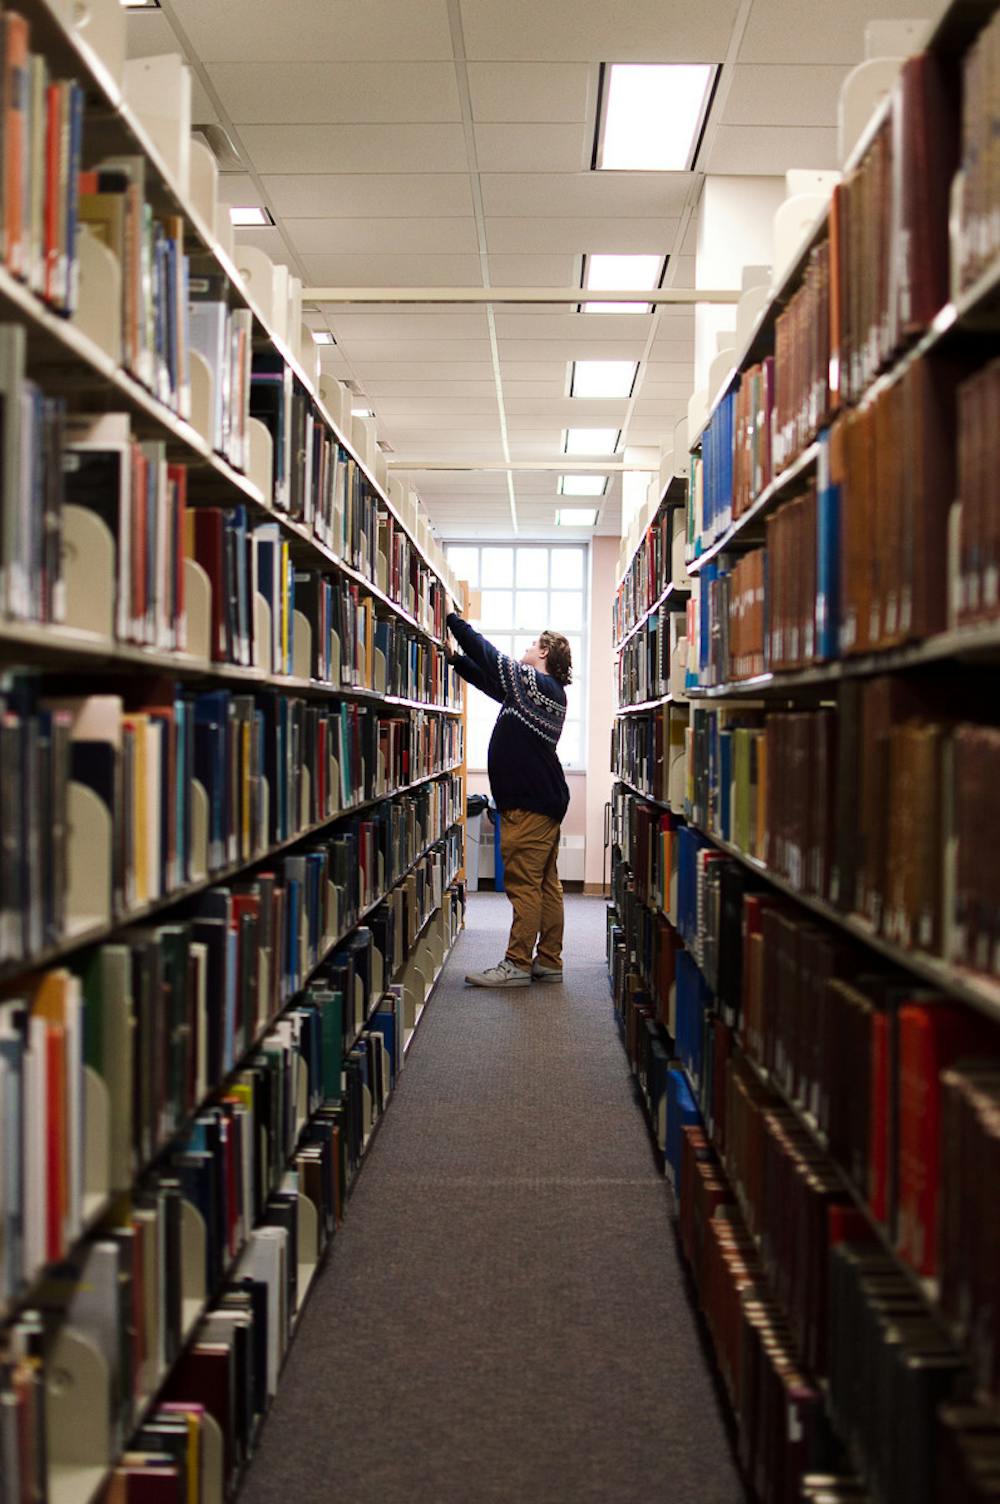 While the library is frequently full of students studying or doing homework, it is rare to find one browsing through the book aisles.